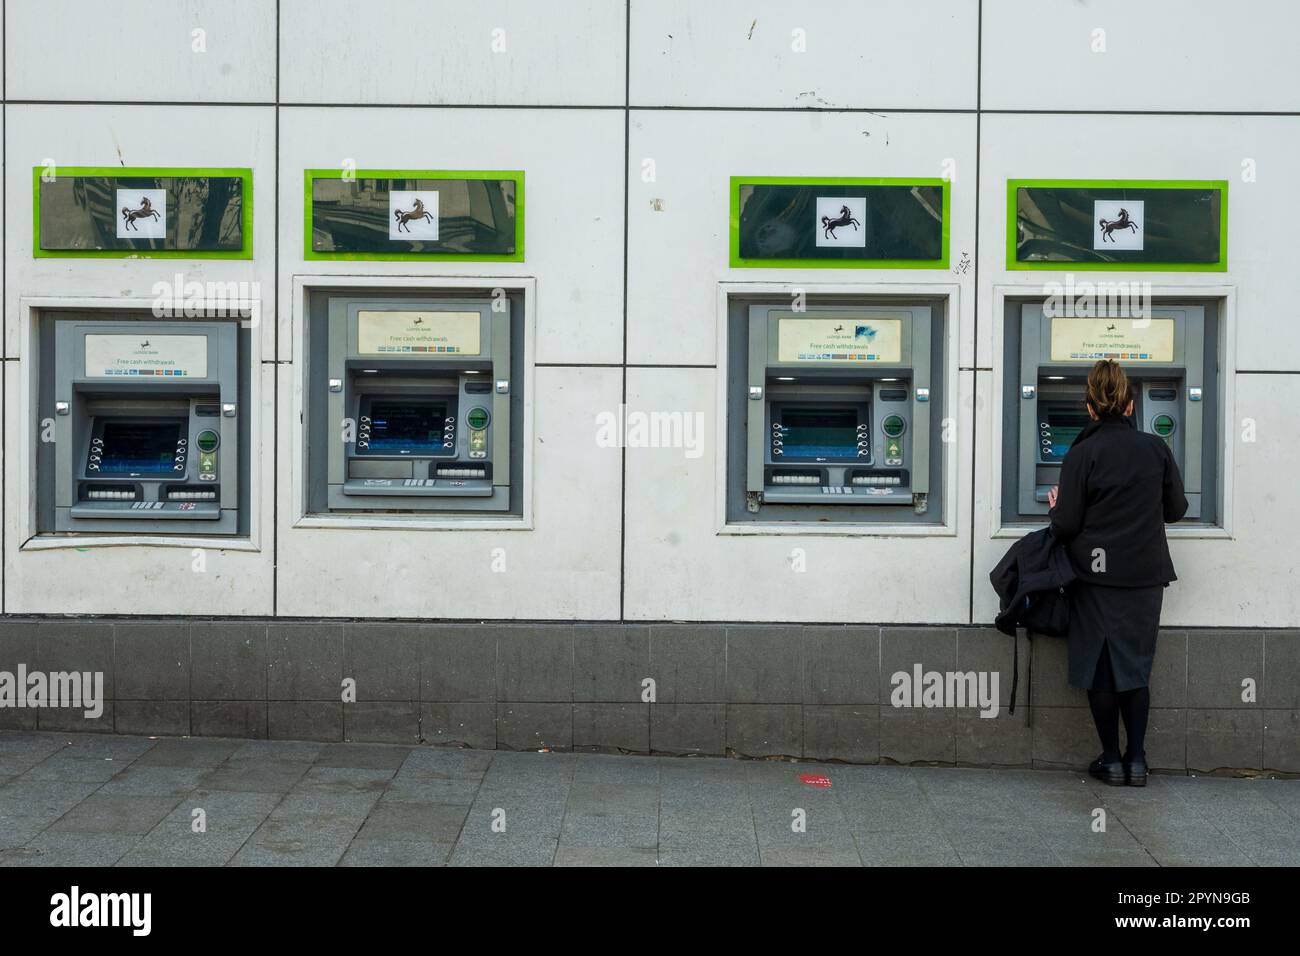 Woman at a row of ATM cash machine terminals. Stock Photo